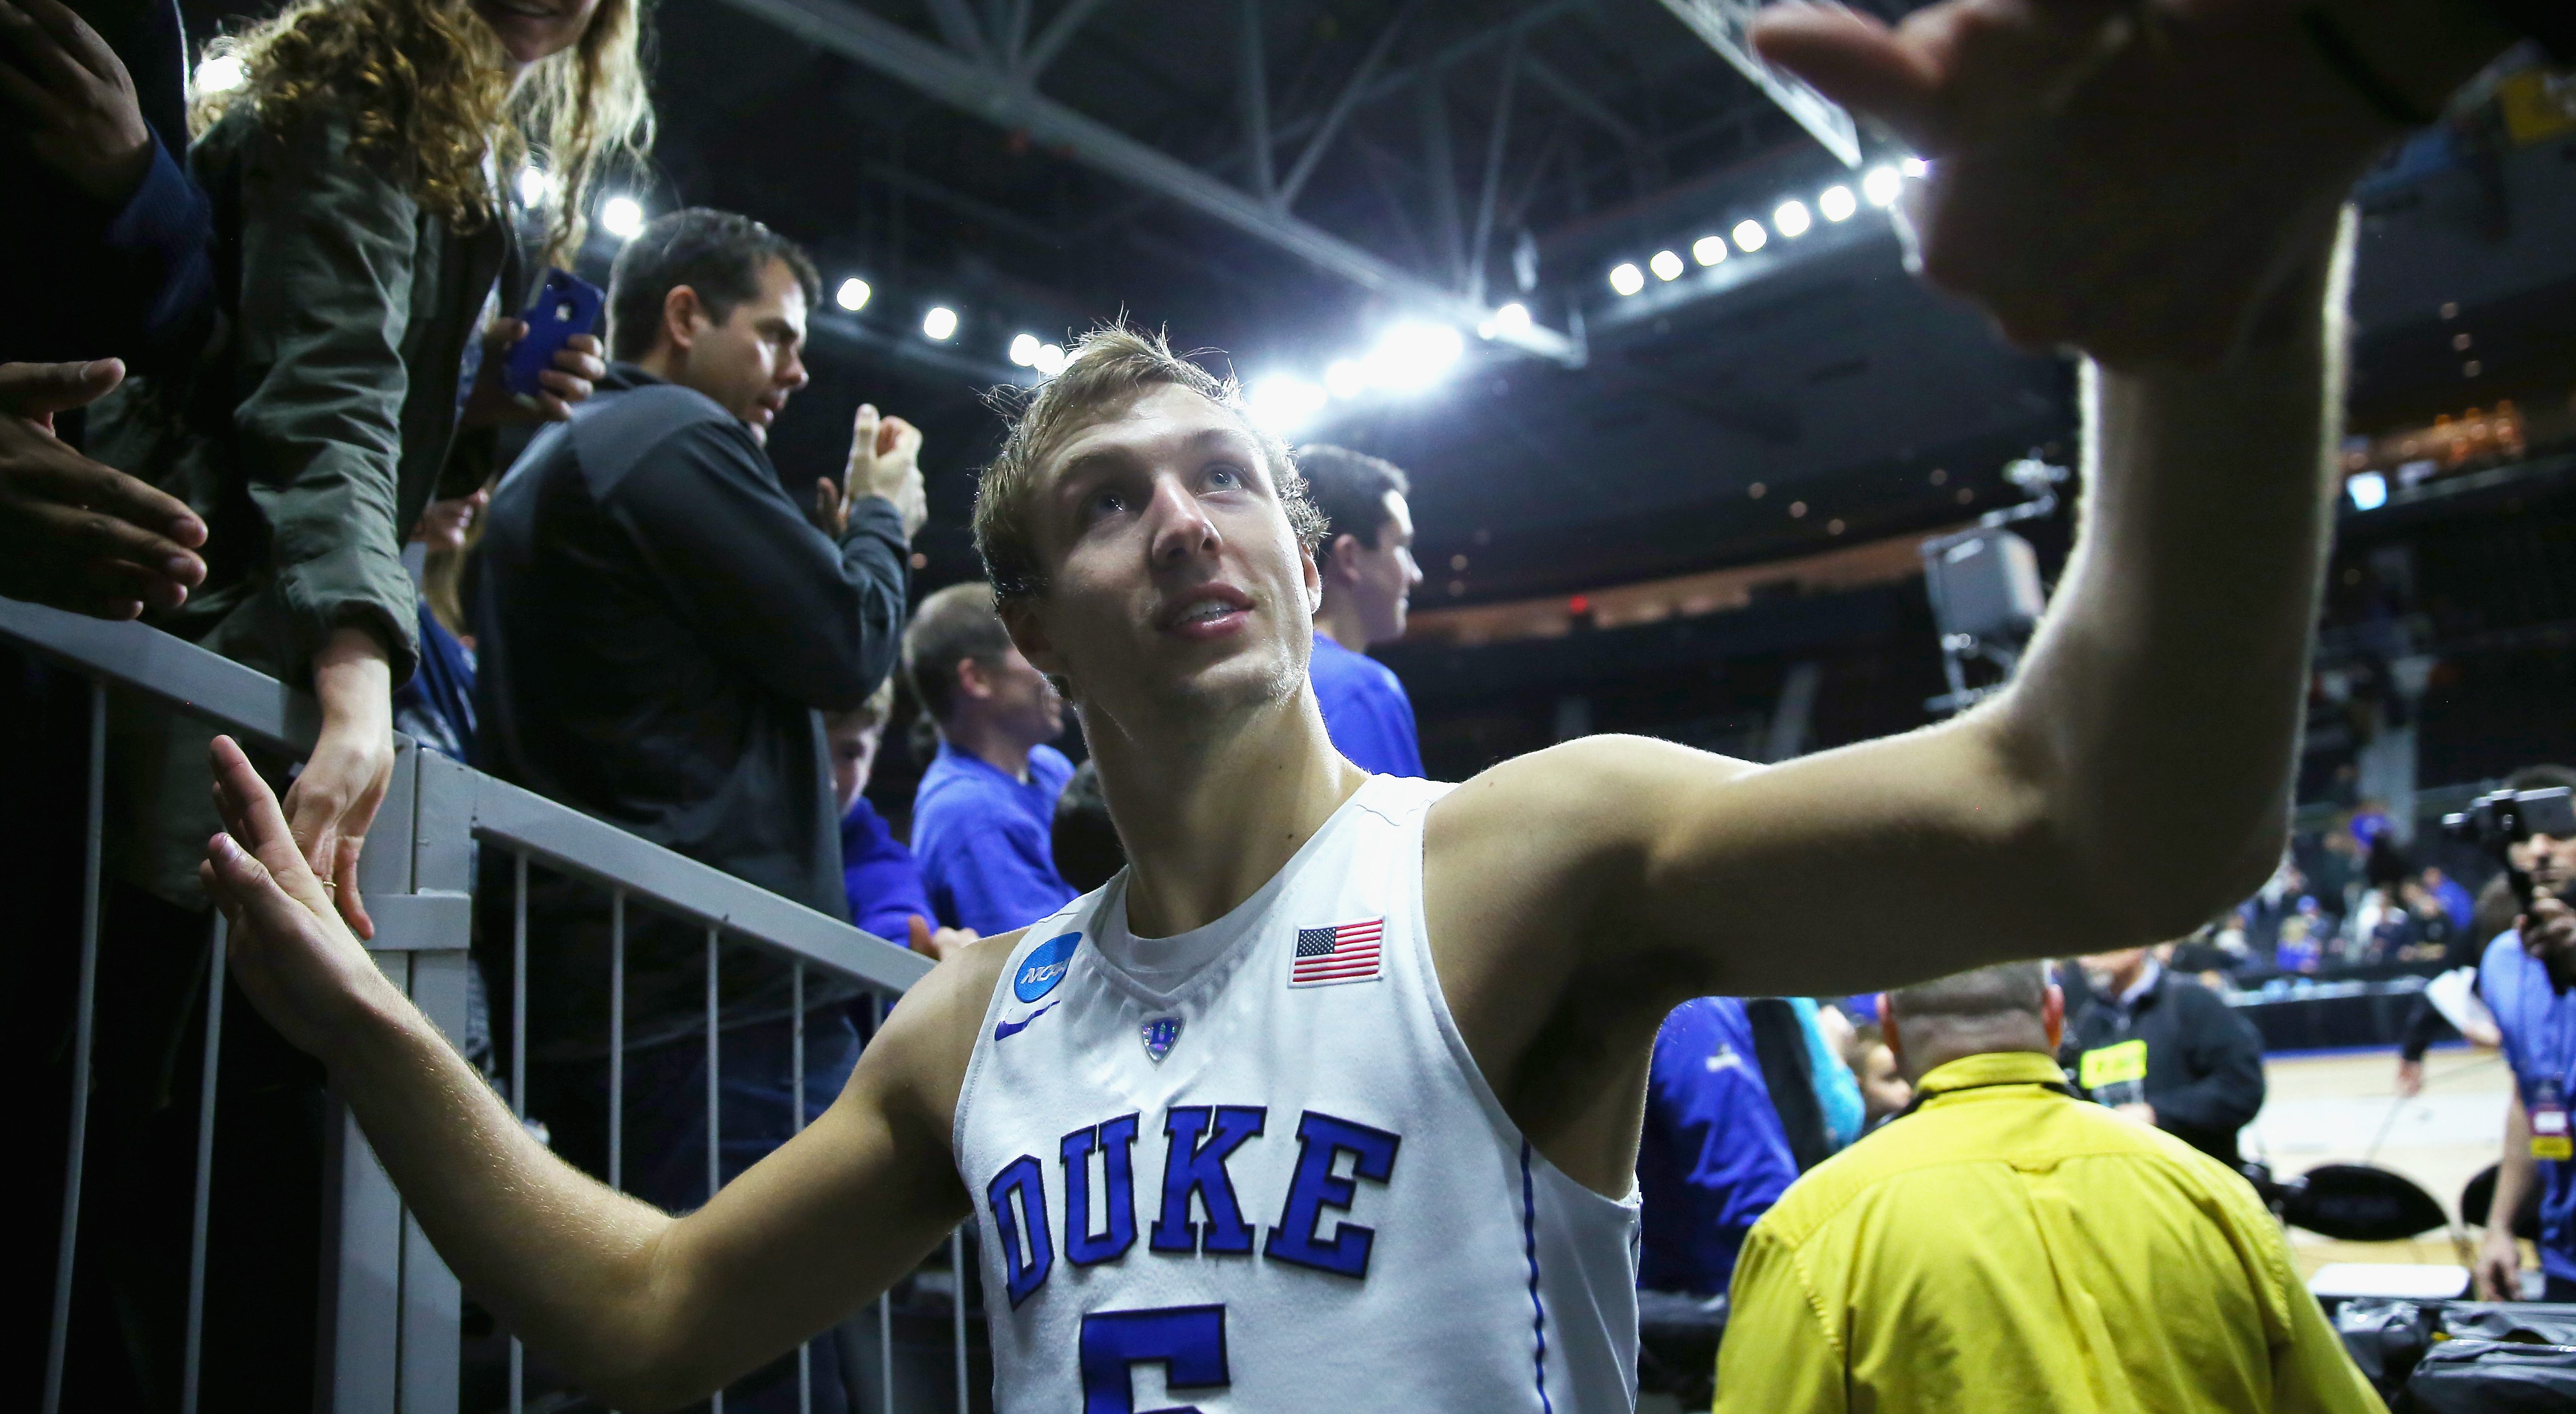 PROVIDENCE, RI - MARCH 19: Luke Kennard #5 of the Duke Blue Devils greets fans after defeating the Yale Bulldogs 71-64 during the second round of the 2016 NCAA Men's Basketball Tournament at Dunkin' Donuts Center on March 19, 2016 in Providence, Rhode Island. (Photo by Jim Rogash/Getty Images)